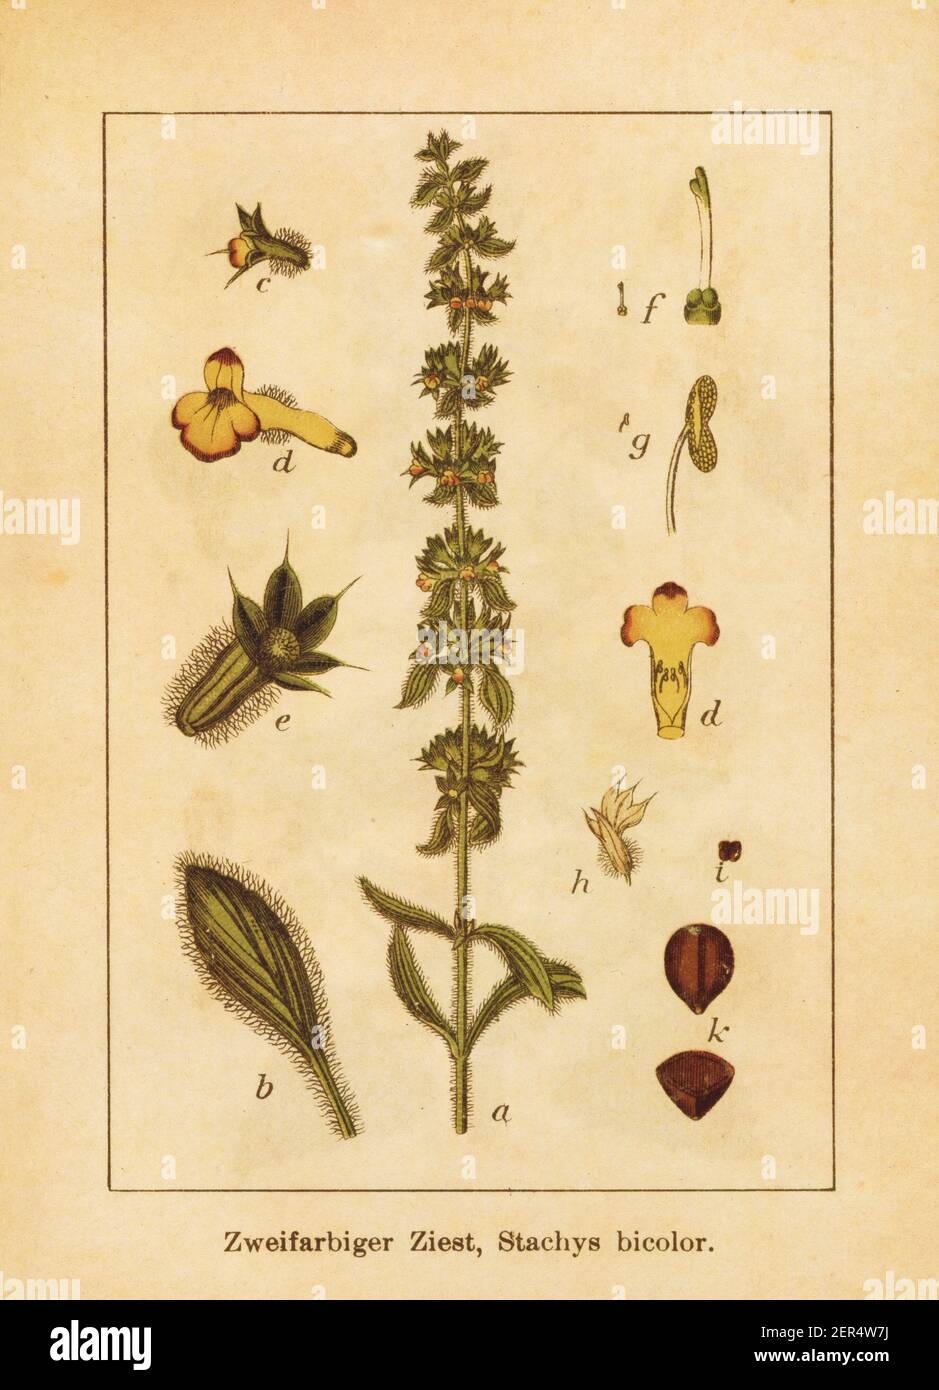 Antique illustration of a stachys bicolor, also known as sideritis montana, mountain ironwort, heal-all, self-heal, woundwort, betony, lamb's ears or Stock Photo